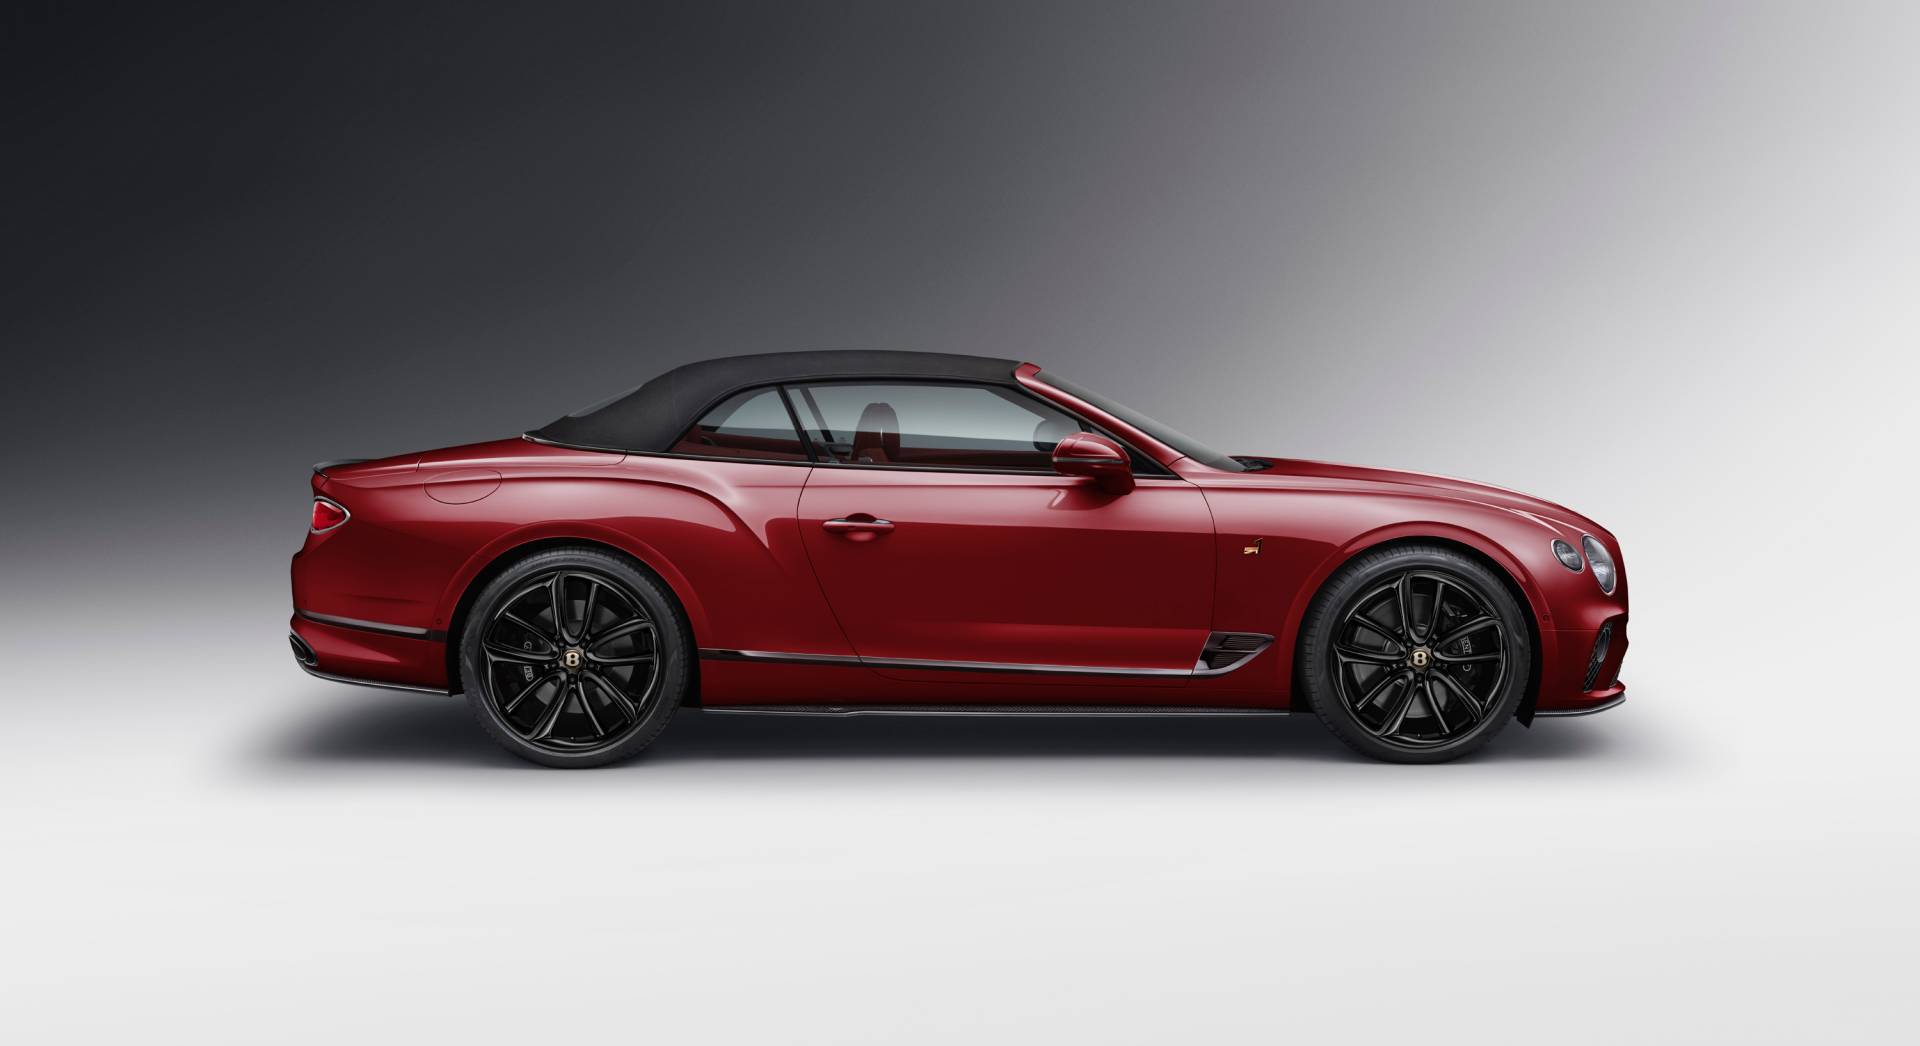 2017 - [Bentley] Continental GT - Page 7 4534b453-bentley-continental-gt-convertible-number-1-edition-by-mulliner-4